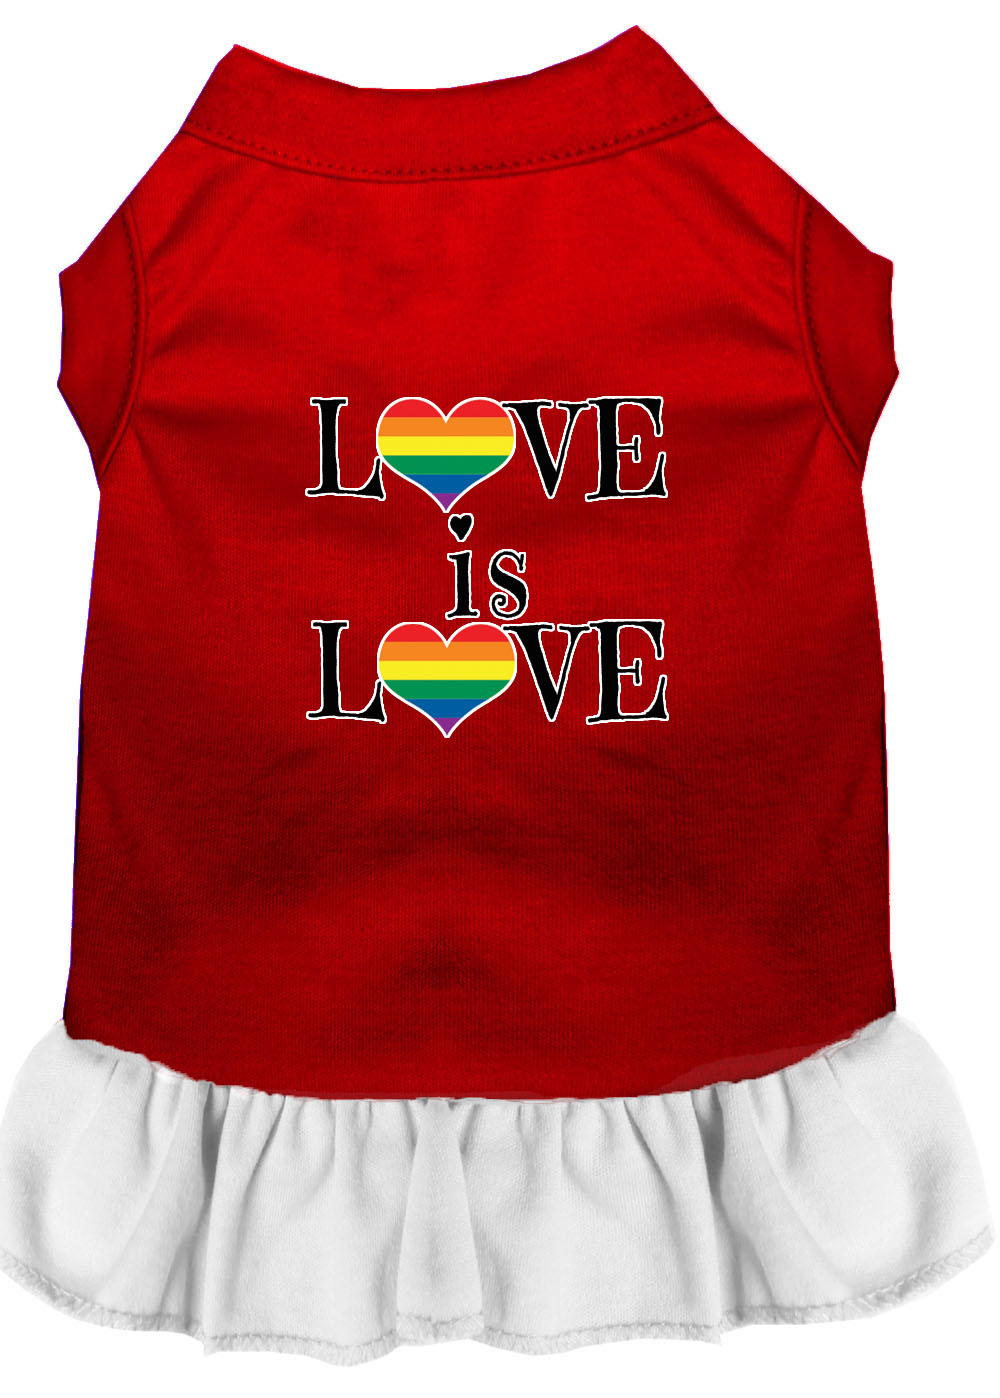 Love is Love Screen Print Dog Dress Red with White Lg